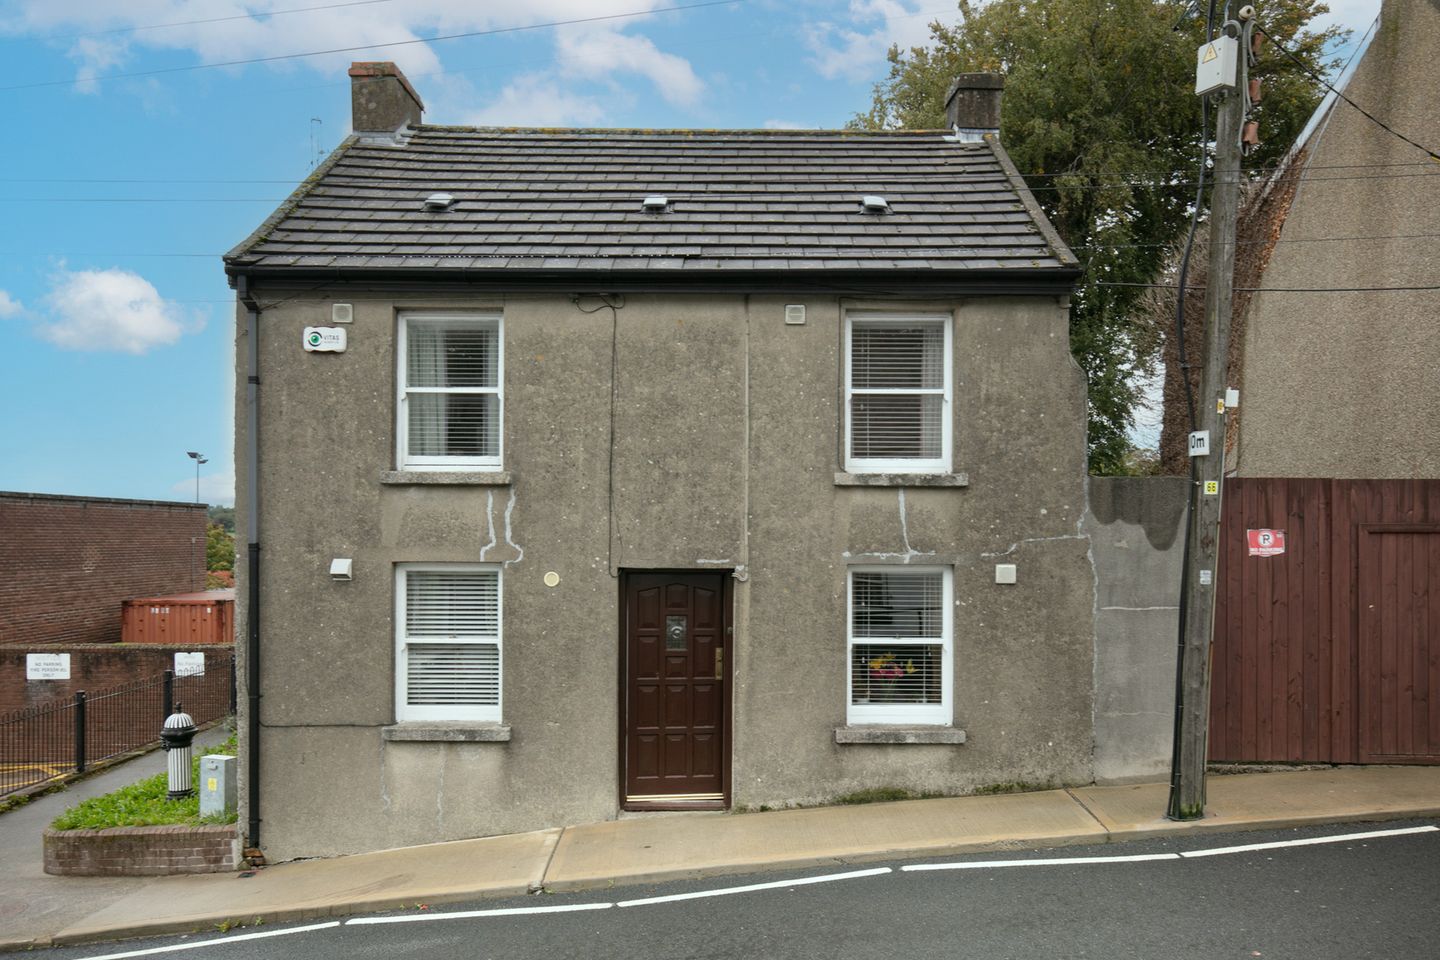 1 Michael Street, New Ross, Co. Wexford, Y34XF74